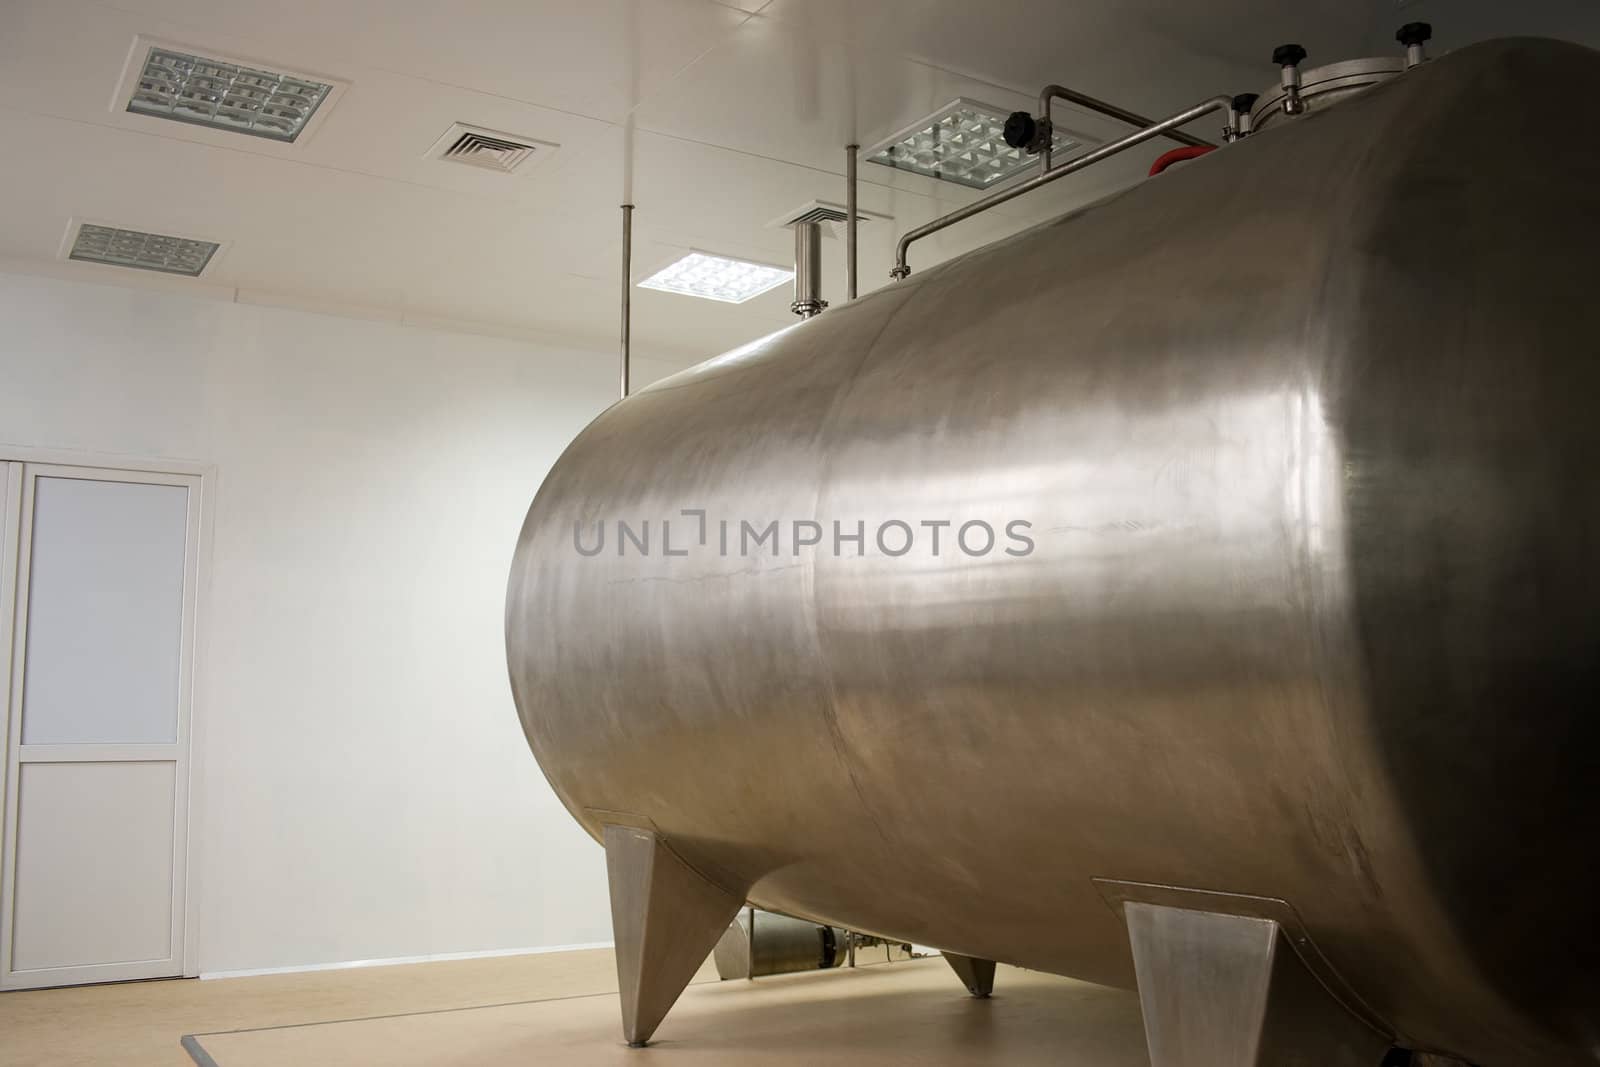 Placing plant medicines, large stainless tank